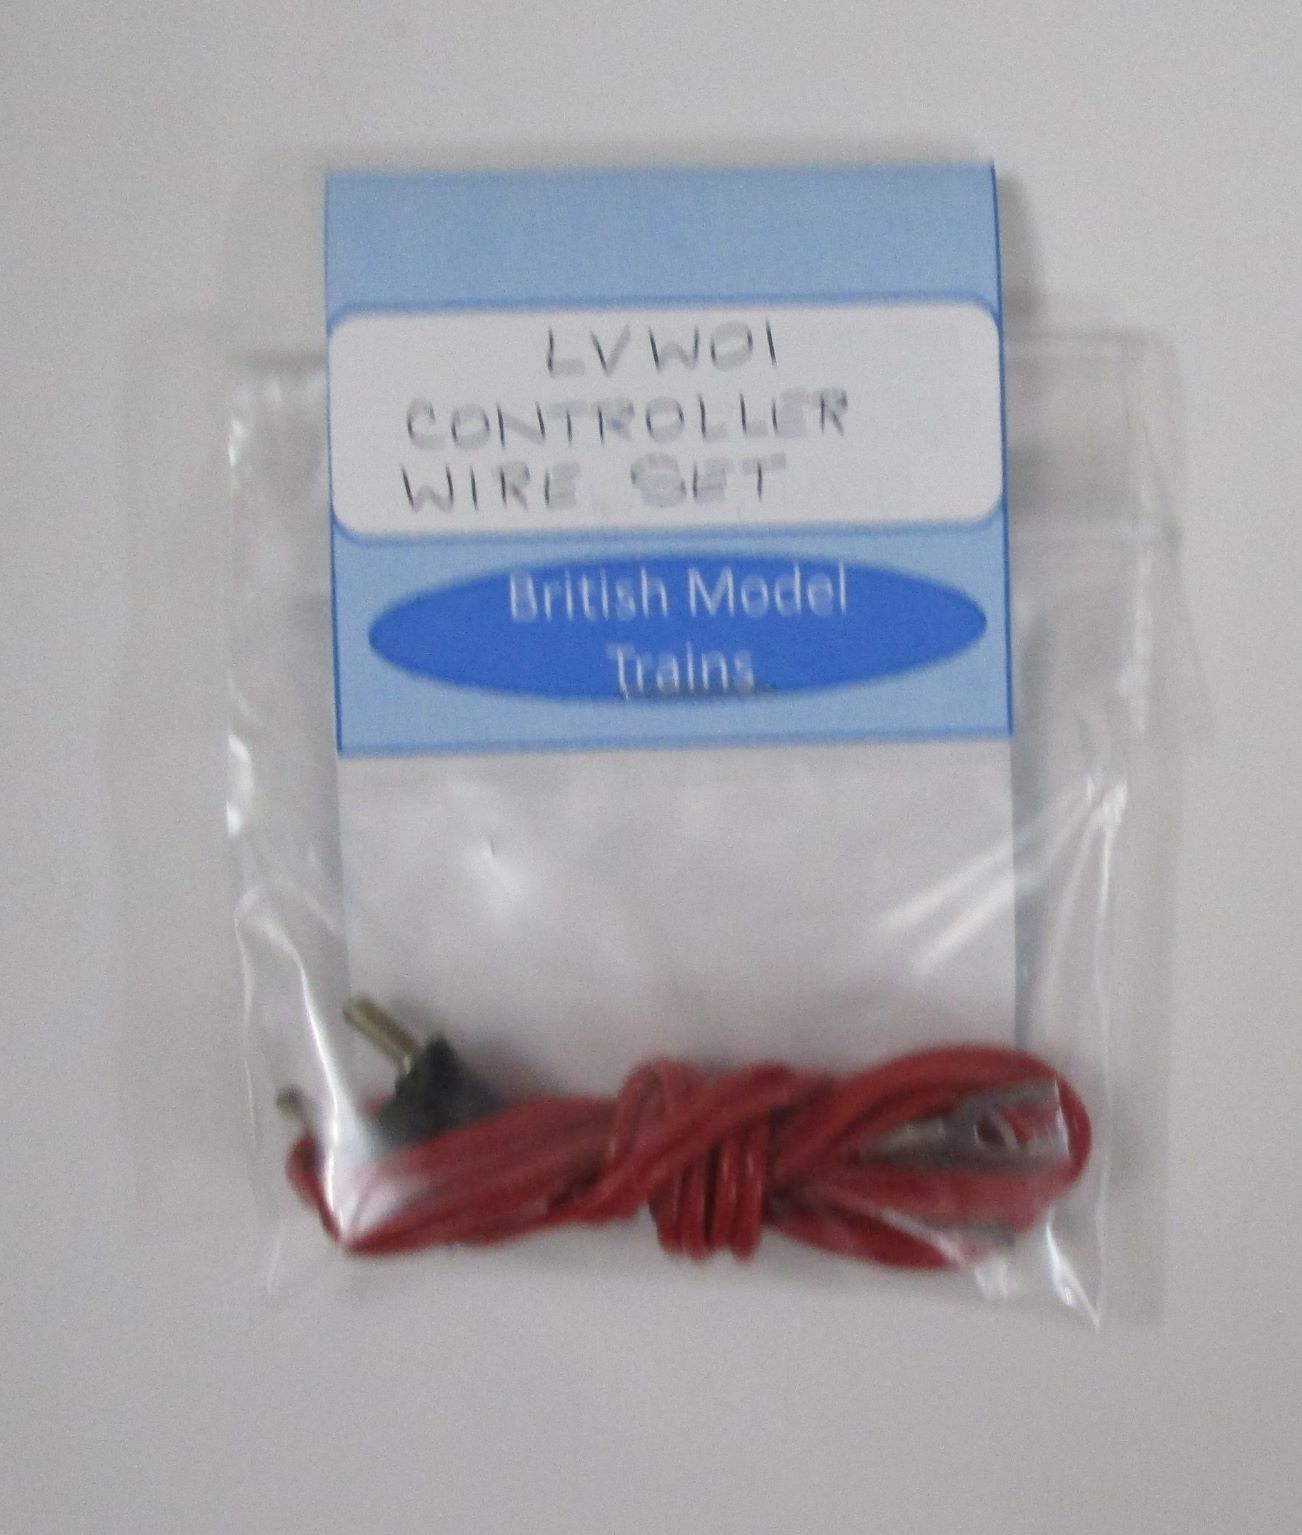 LVW01 Controller wire set